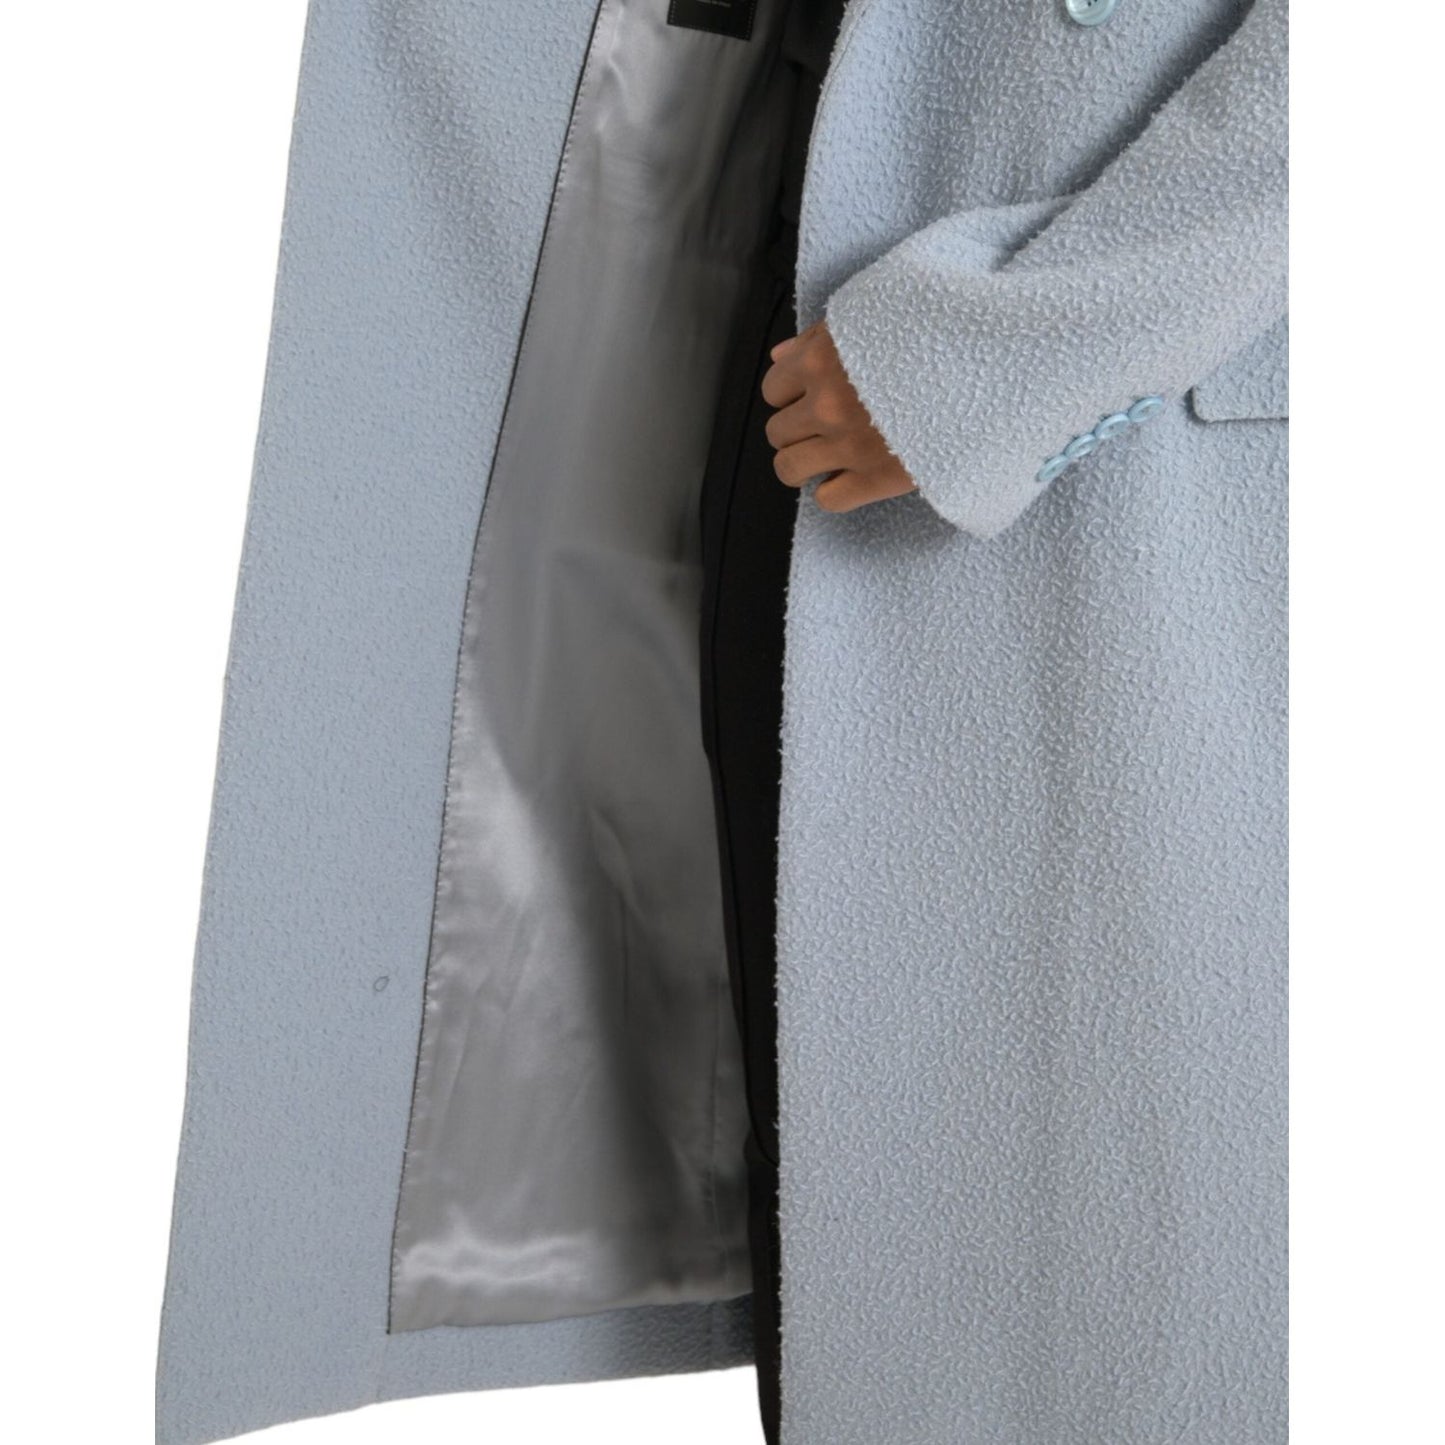 Dolce & Gabbana Blue Double Breasted Long Trench Coat Jacket blue-double-breasted-long-trench-coat-jacket